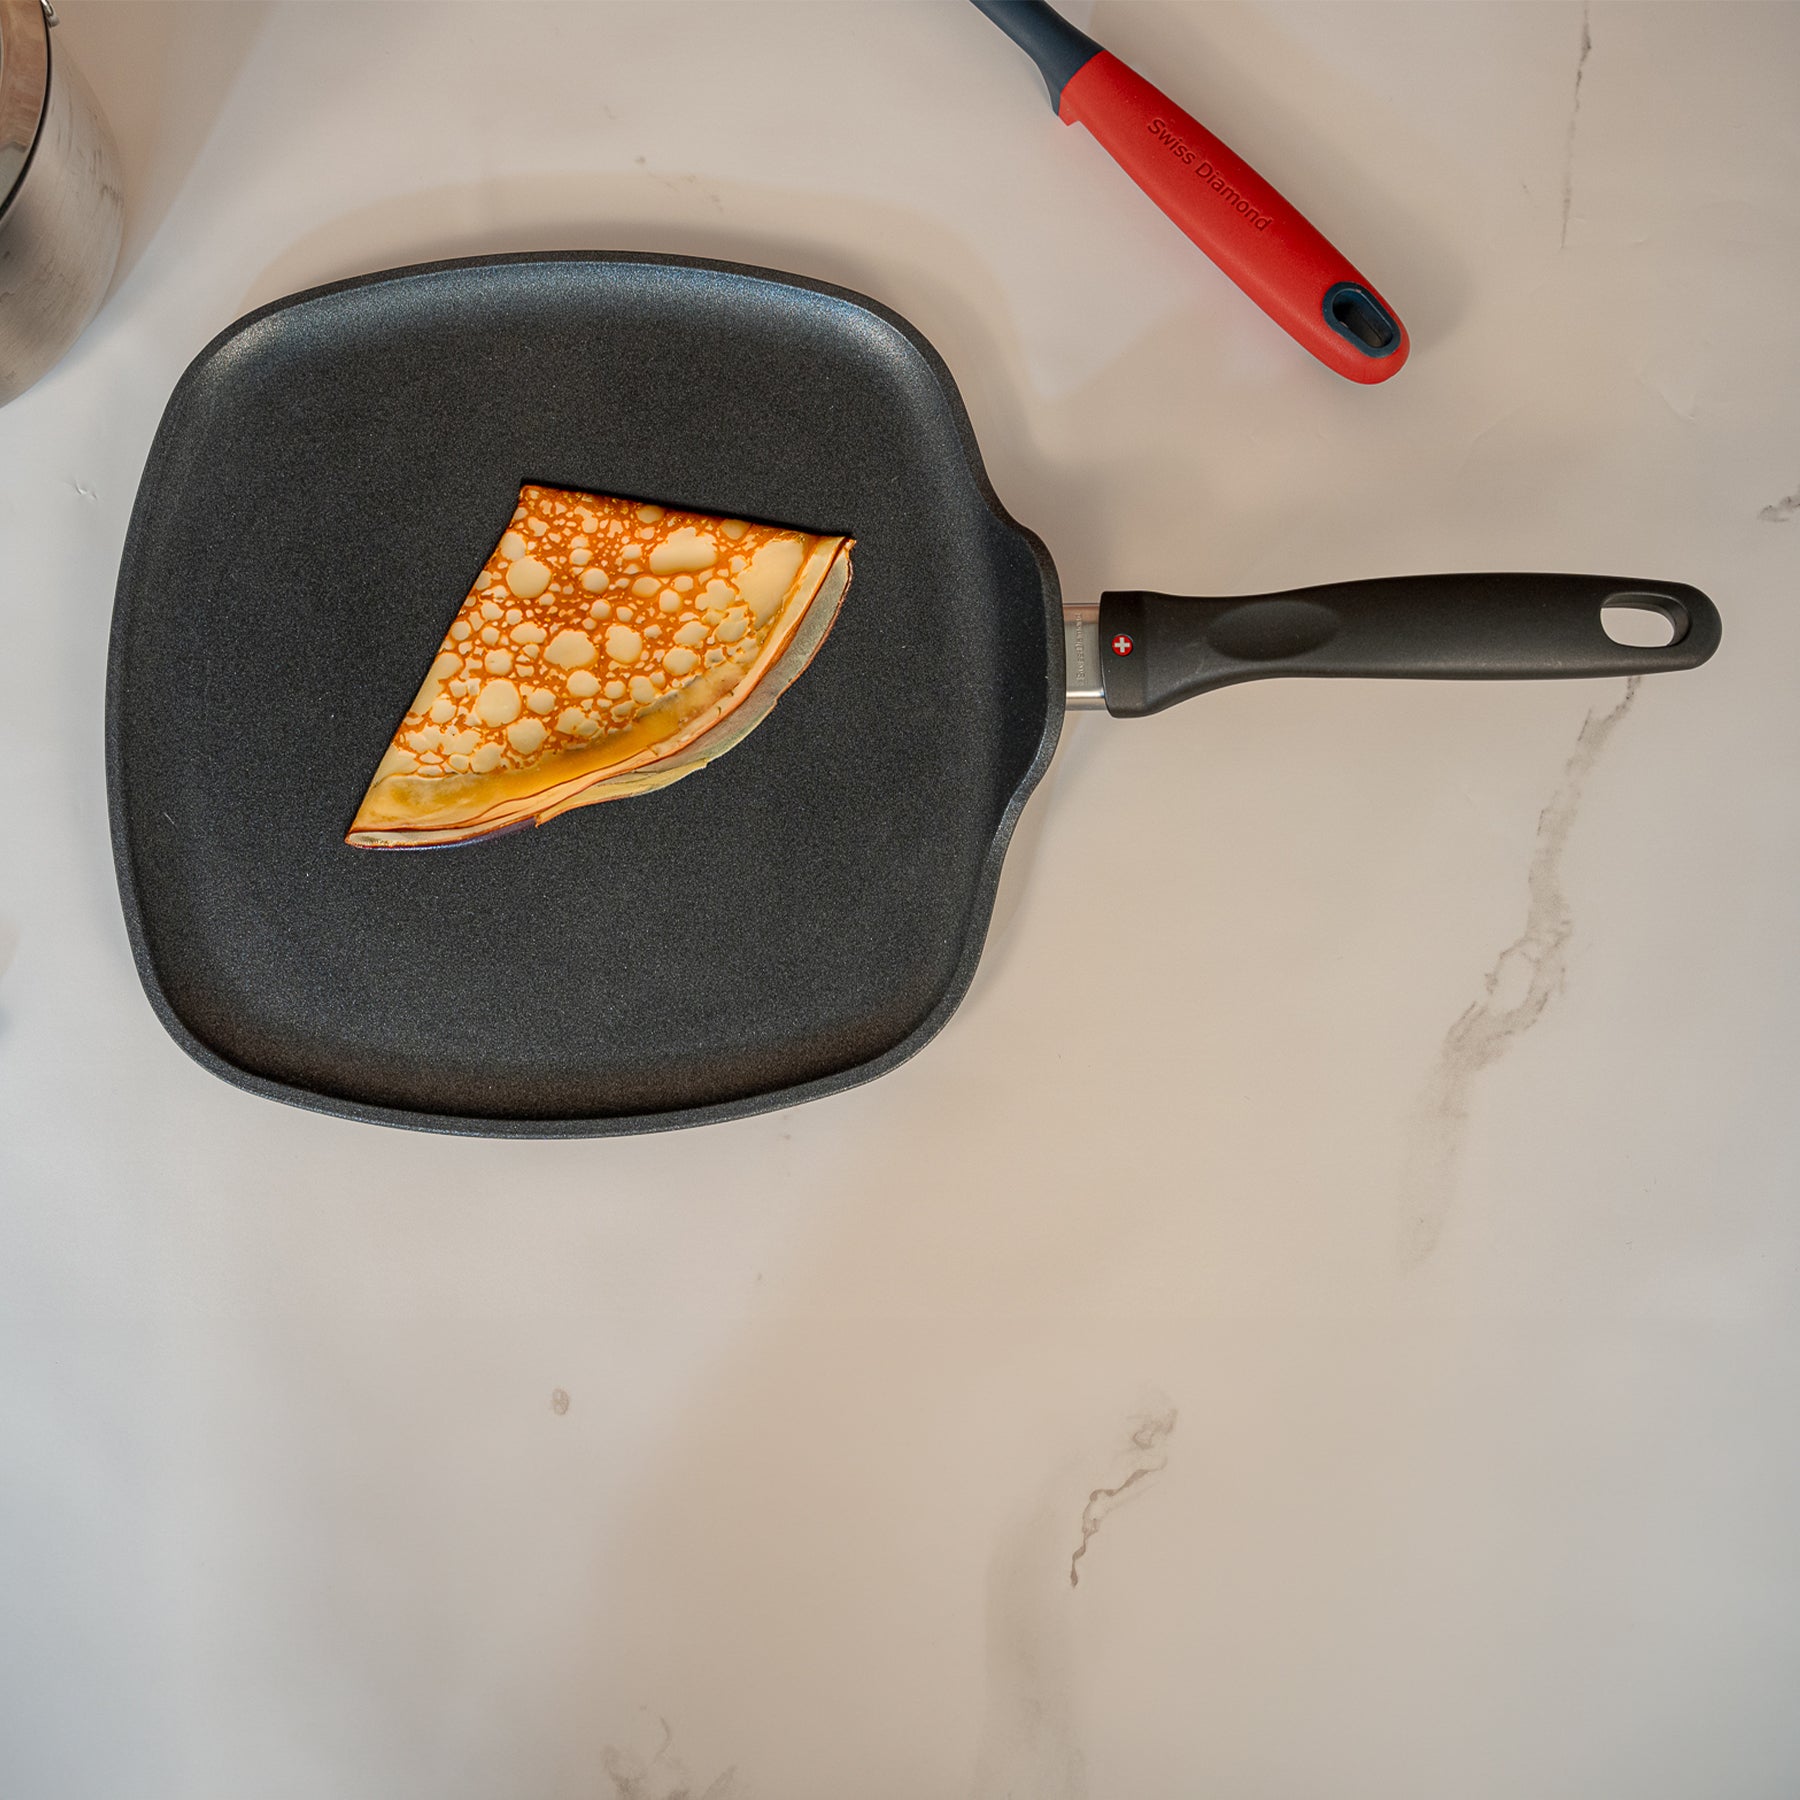 XD Nonstick 11" x 11" Square Griddle in use with folded crepe